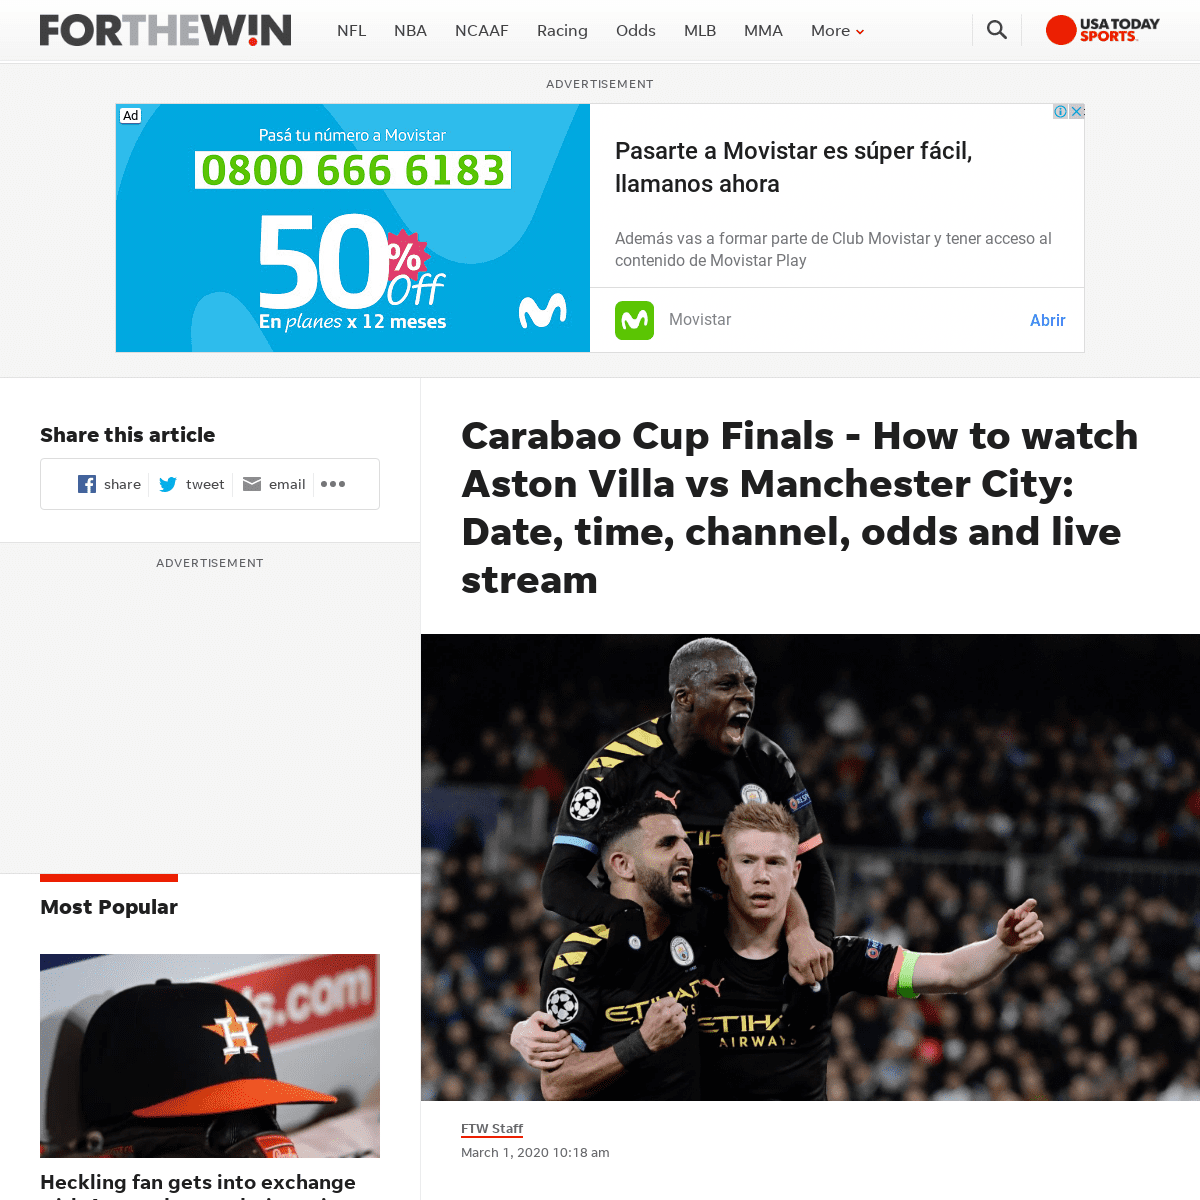 A complete backup of ftw.usatoday.com/2020/03/carabao-cup-live-stream-how-to-watch-aston-villa-vs-manchester-city-efl-cup-finals